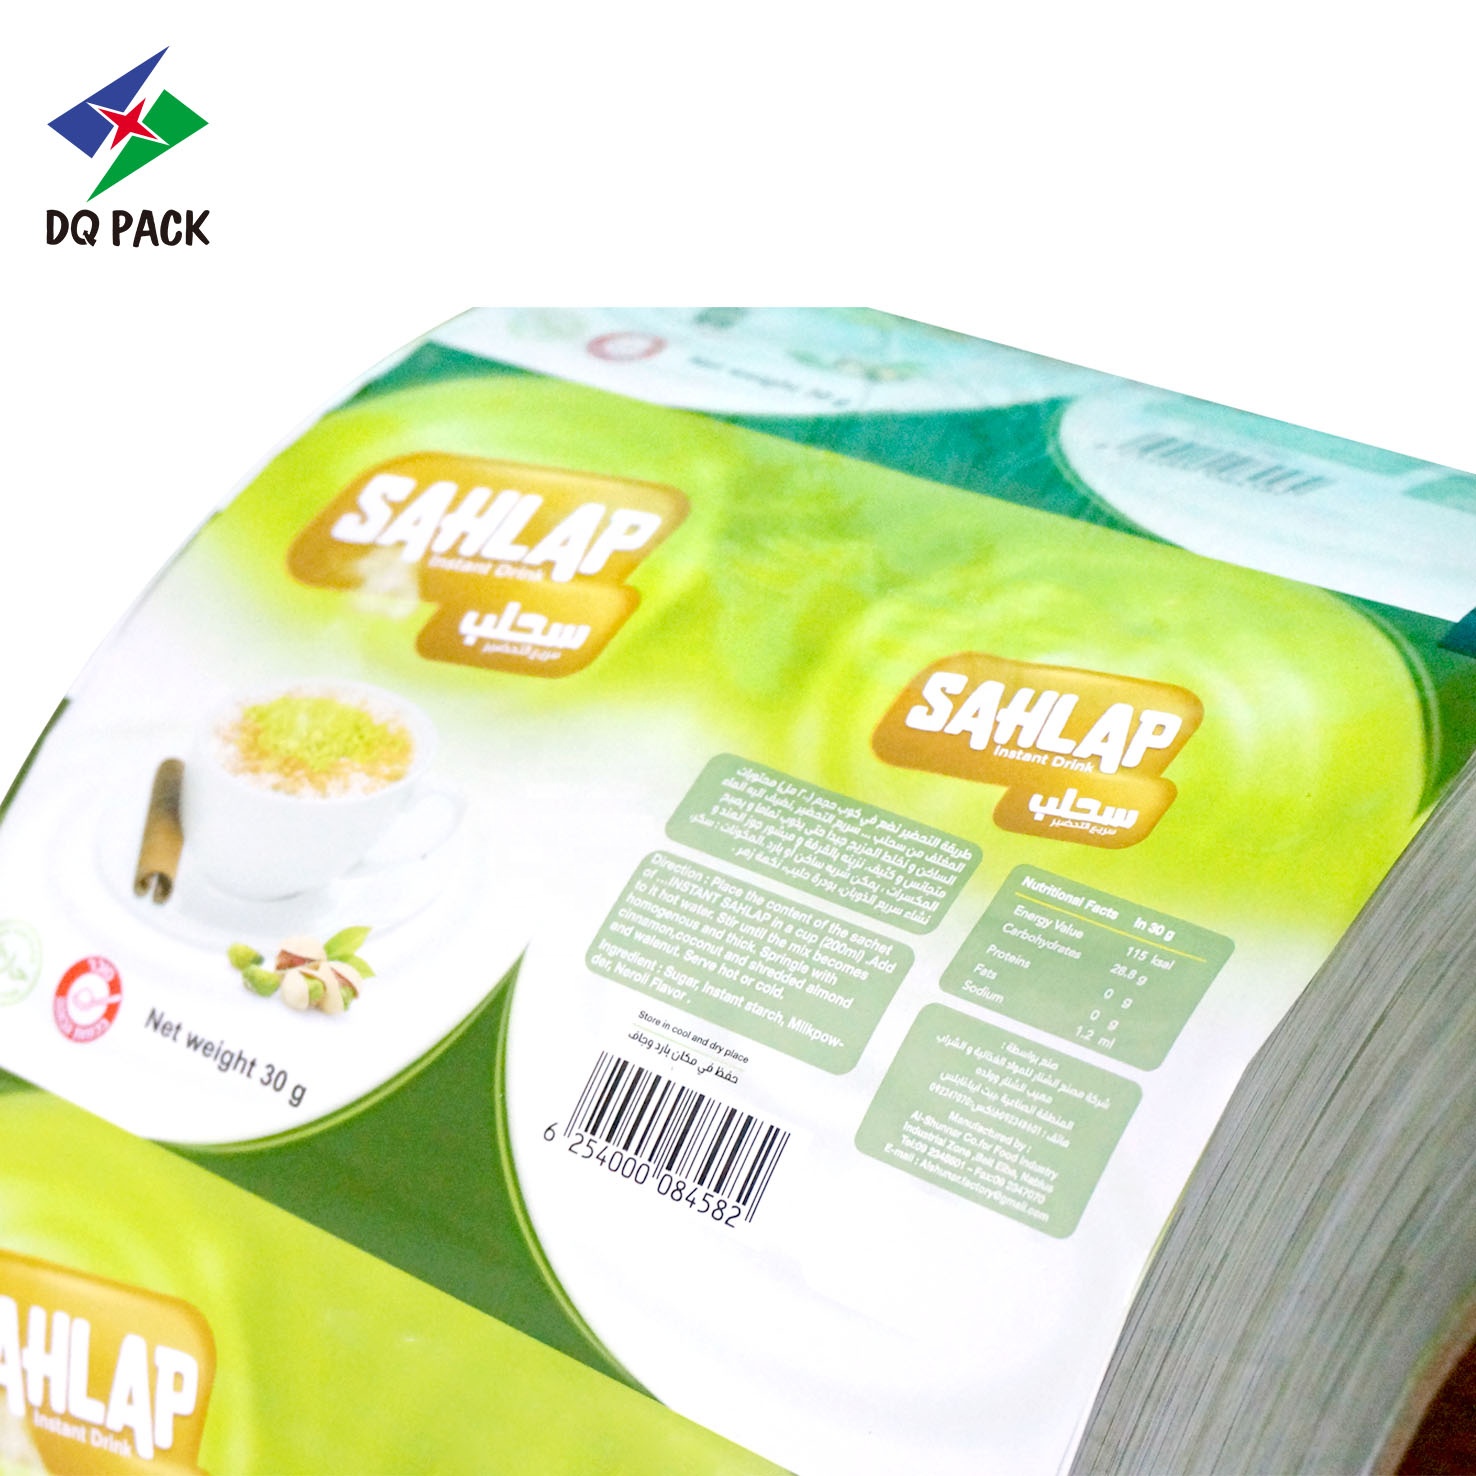 DQ PACK China Food OPP CPP Laminated Biscuit Potato Chips Bag Packaging Film Roll For Candy Packaging